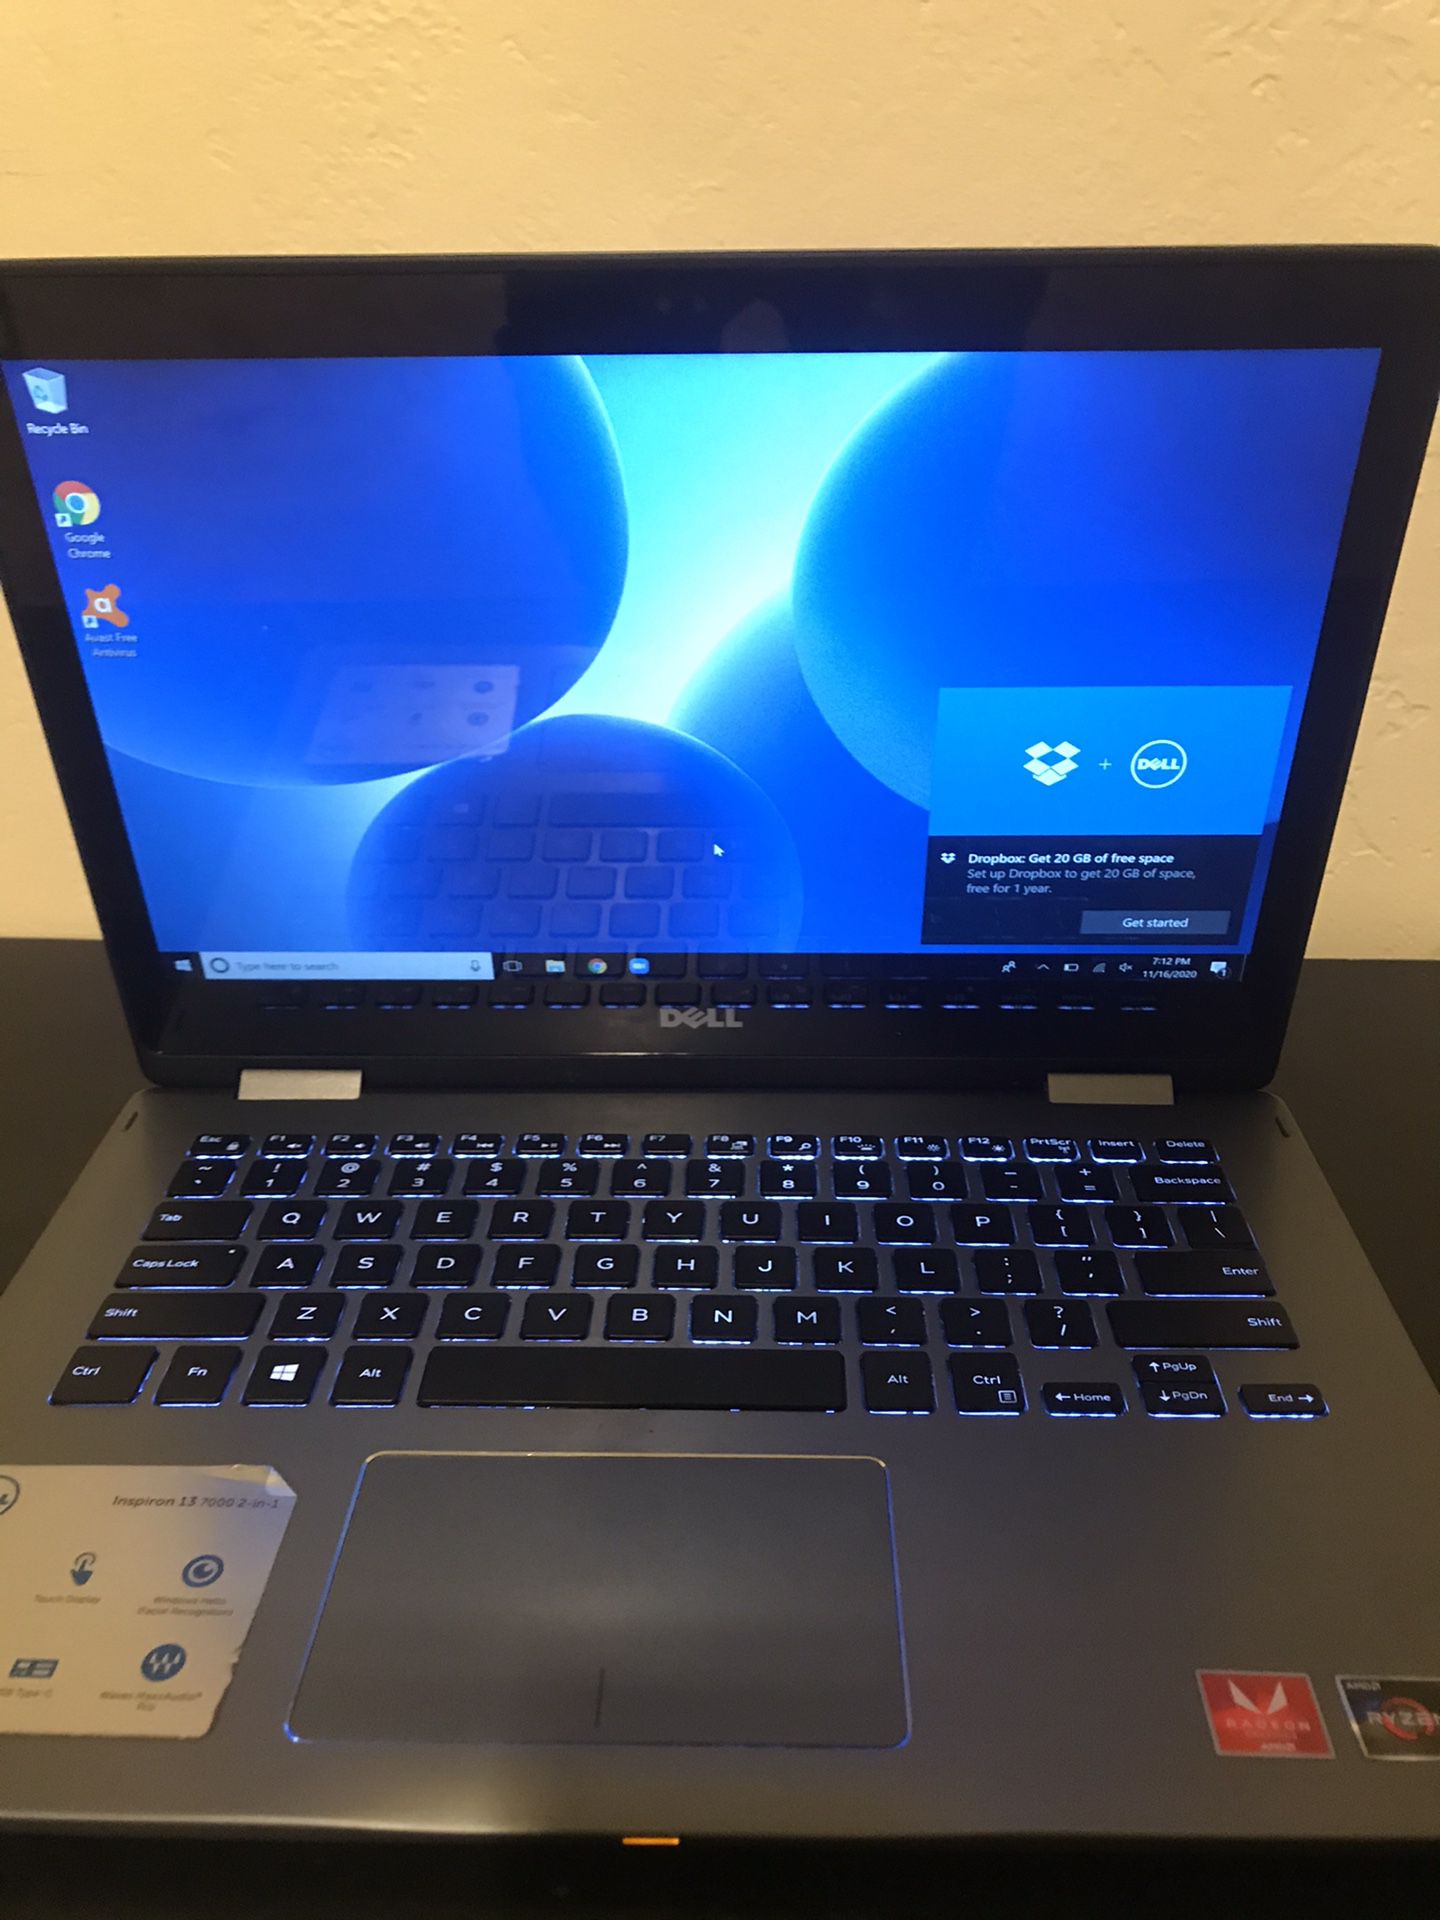 DELL Inspiron 13 7000 2 In 1 Touch Screen Laptop